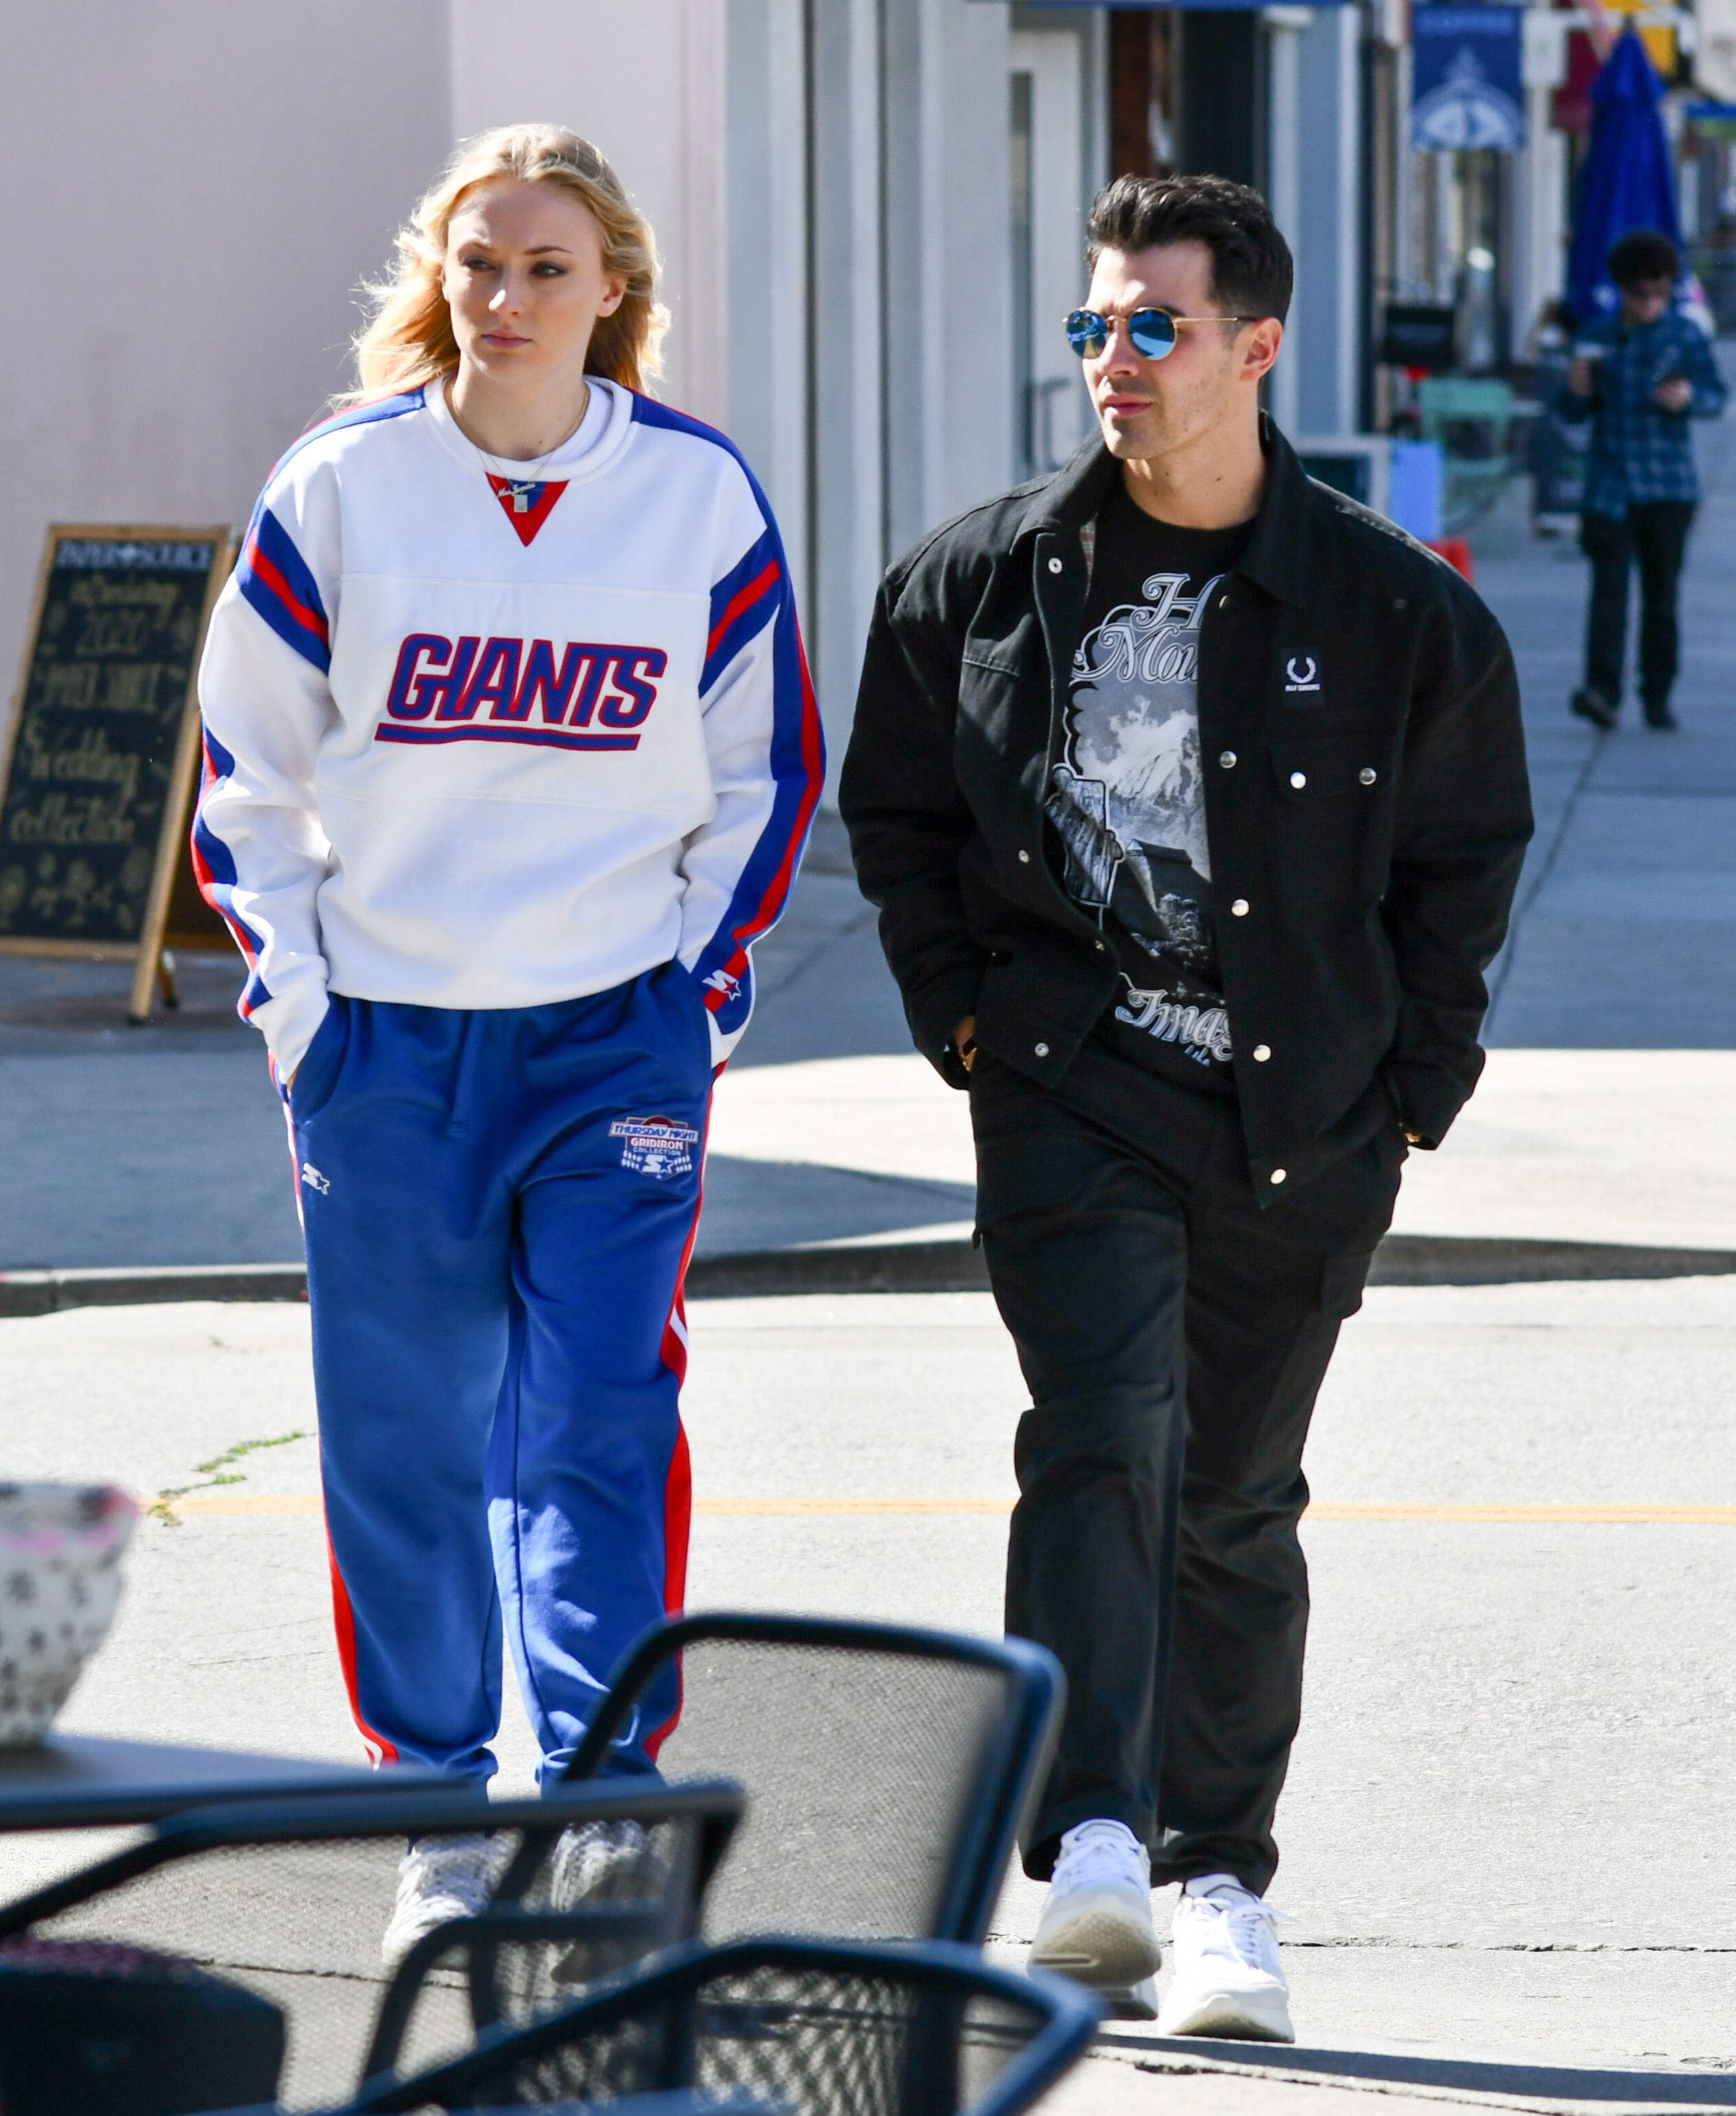 Sophie Turner and Joe Jonas walk on the street in Los Angeles, California on March 2, 2020 | Source: Getty Images